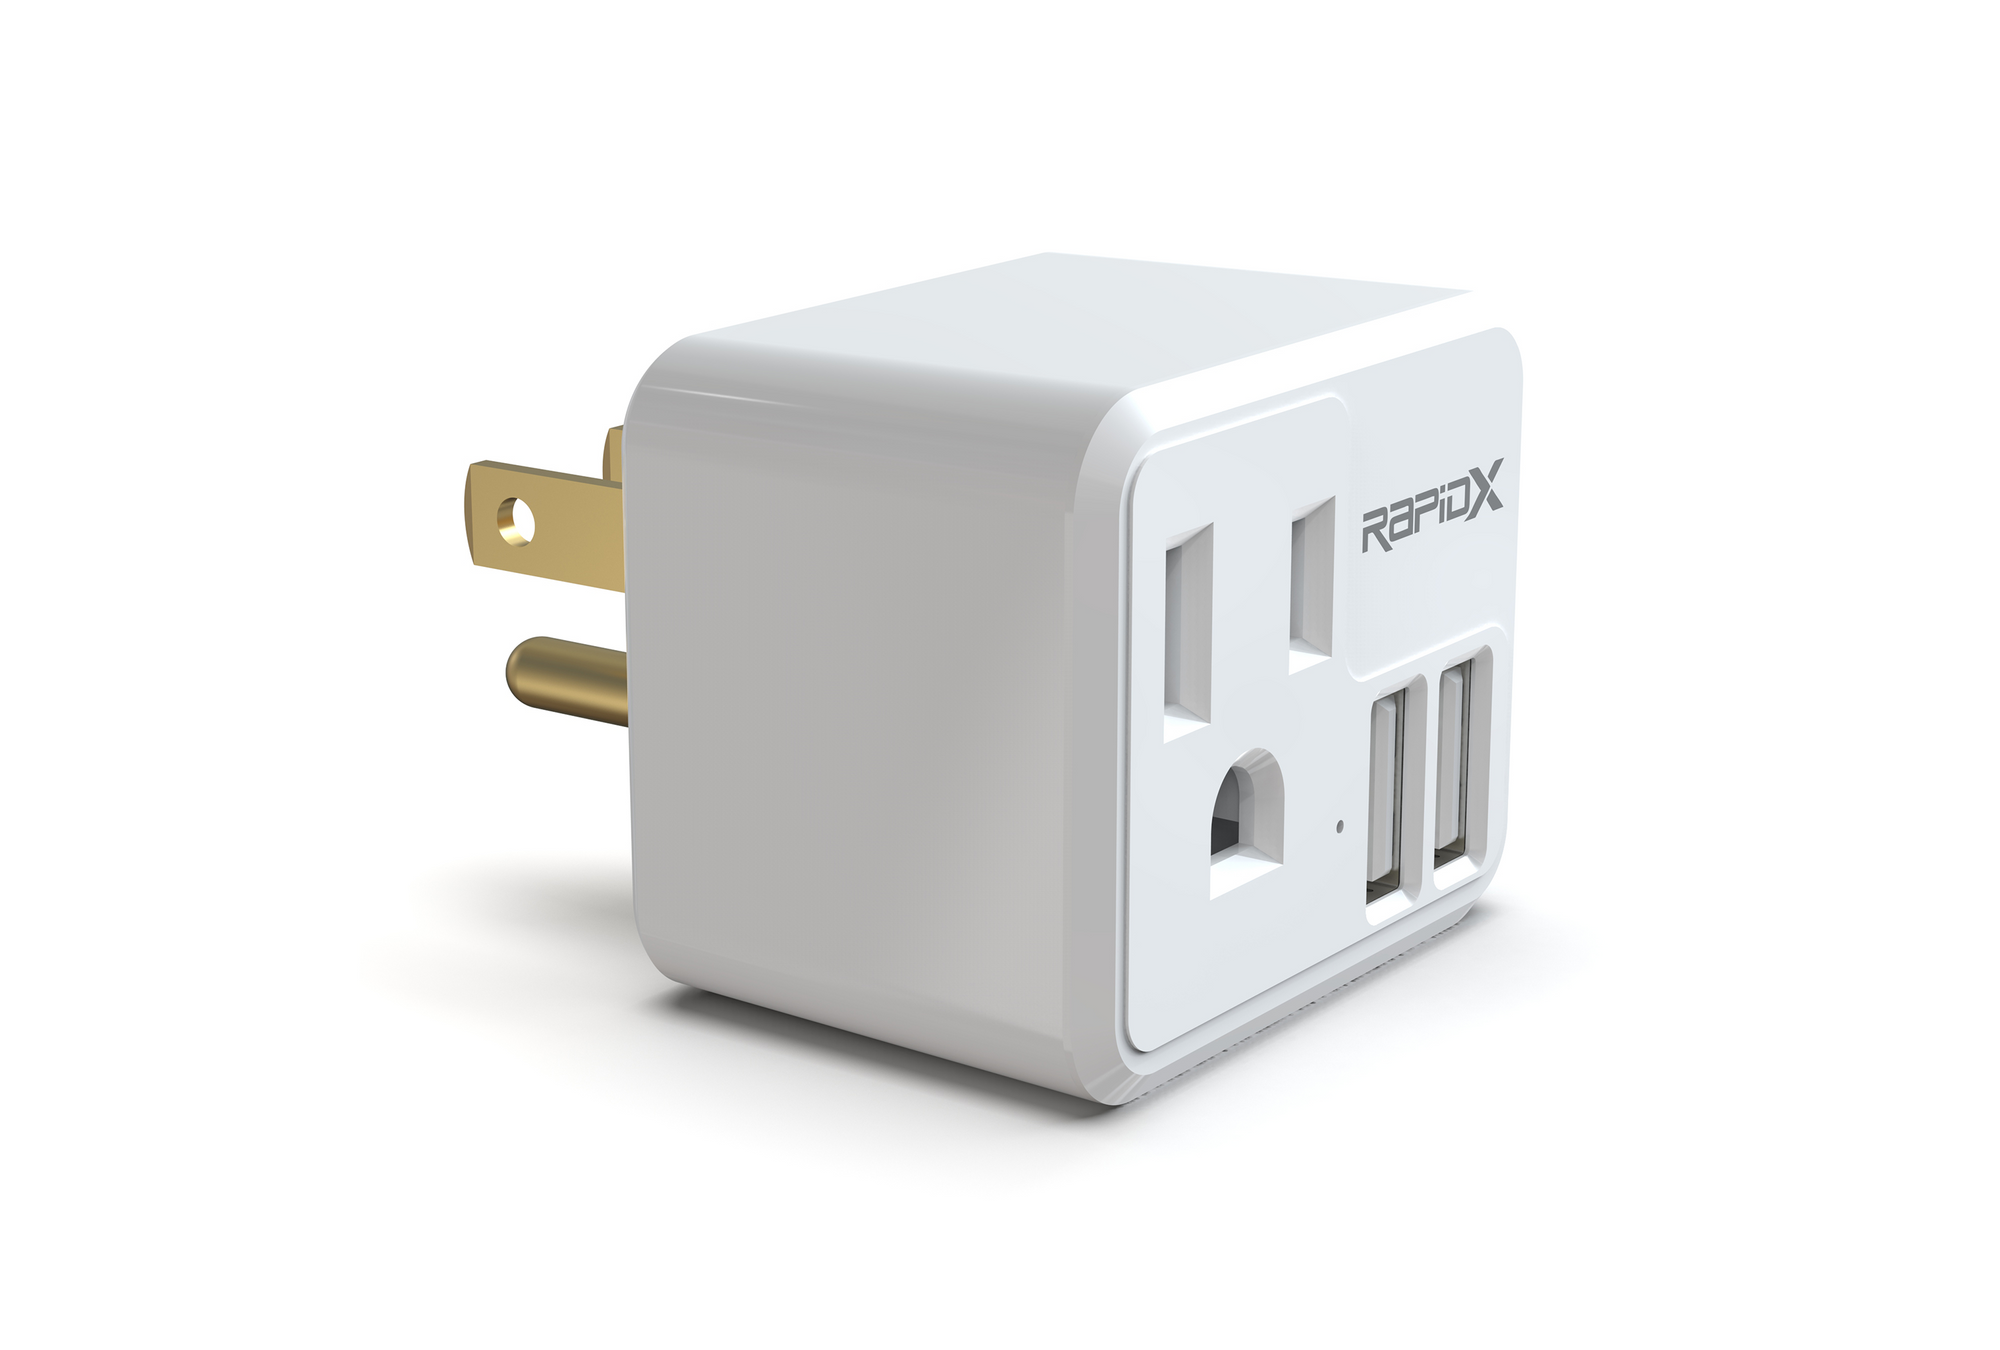 PowX-2 Wall Outlet with 2 USB Ports by RapidX White - RapidX